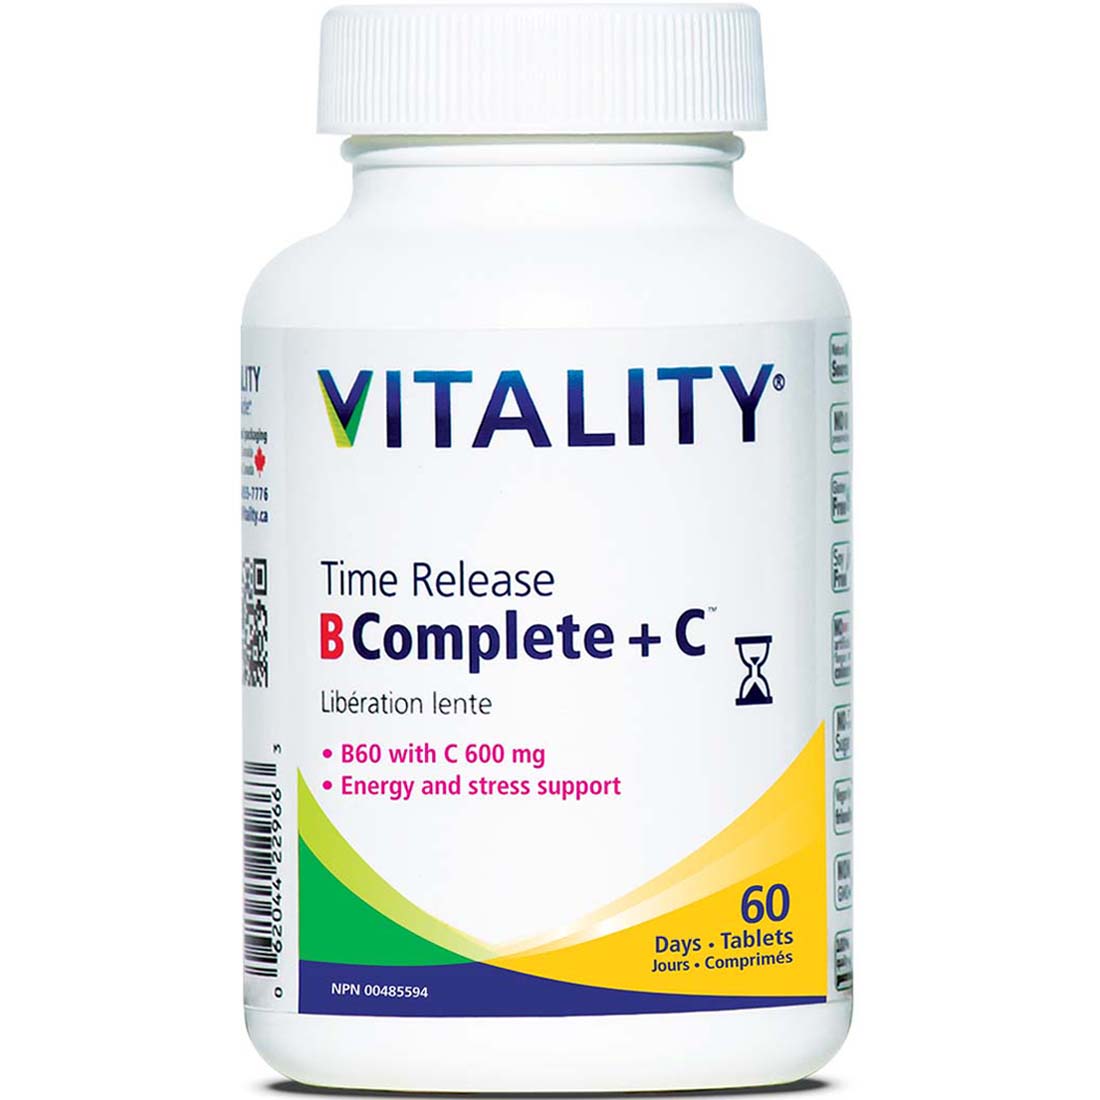 Vitality Time Release B Complete + C